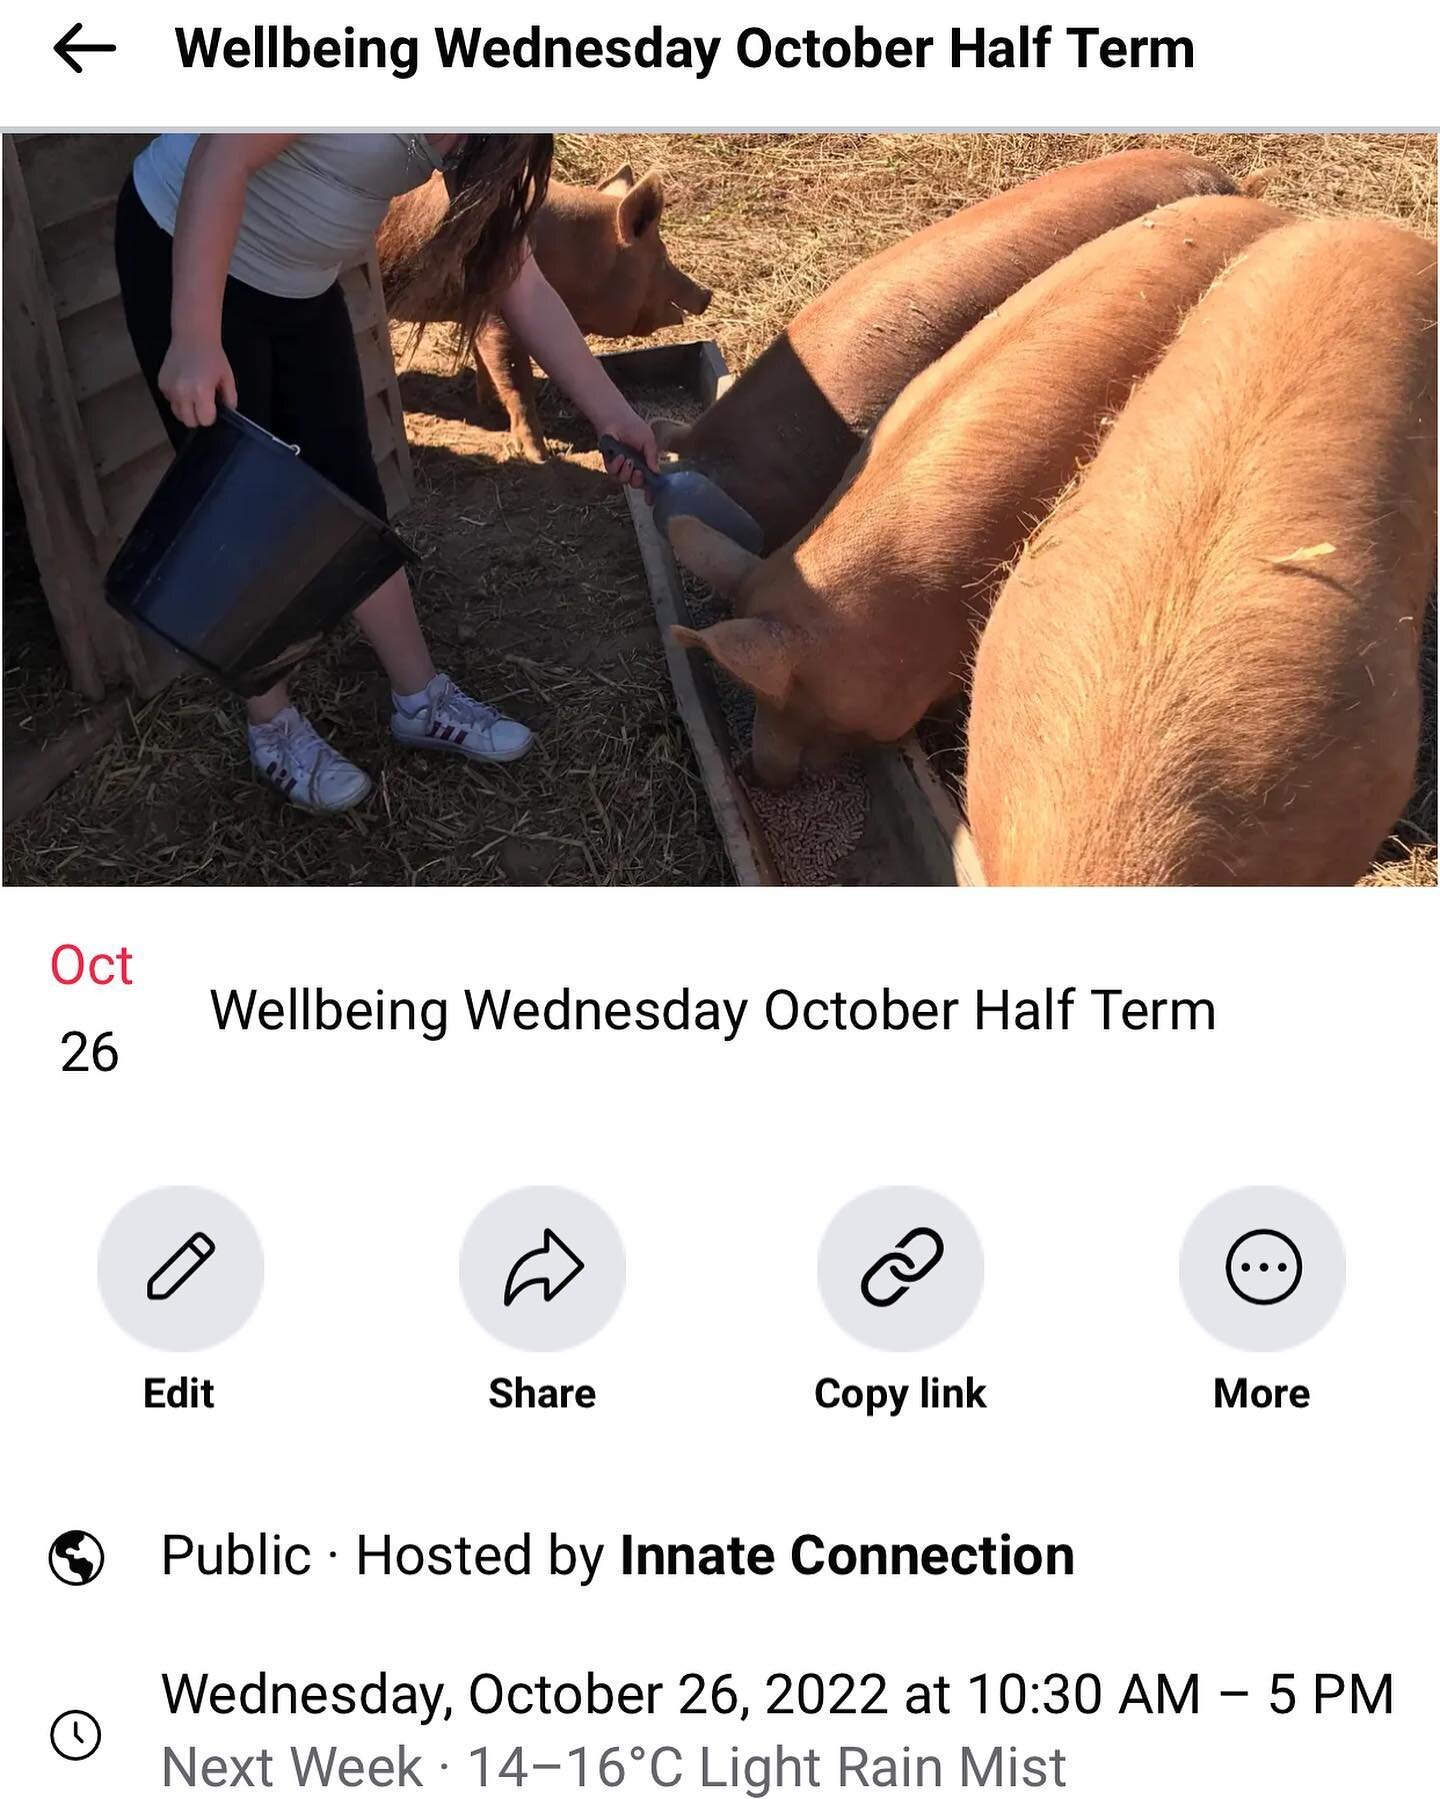 ONE SPACE LEFT! 

One place remaining for Wellbeing Wednesday Holiday Club next week - Wednesday 26th October 💚 10:30am to 5pm. 

A farm wellbeing day for ages 8+, making new friends, enjoying time outdoors and with the animals. On the day we&rsquo;